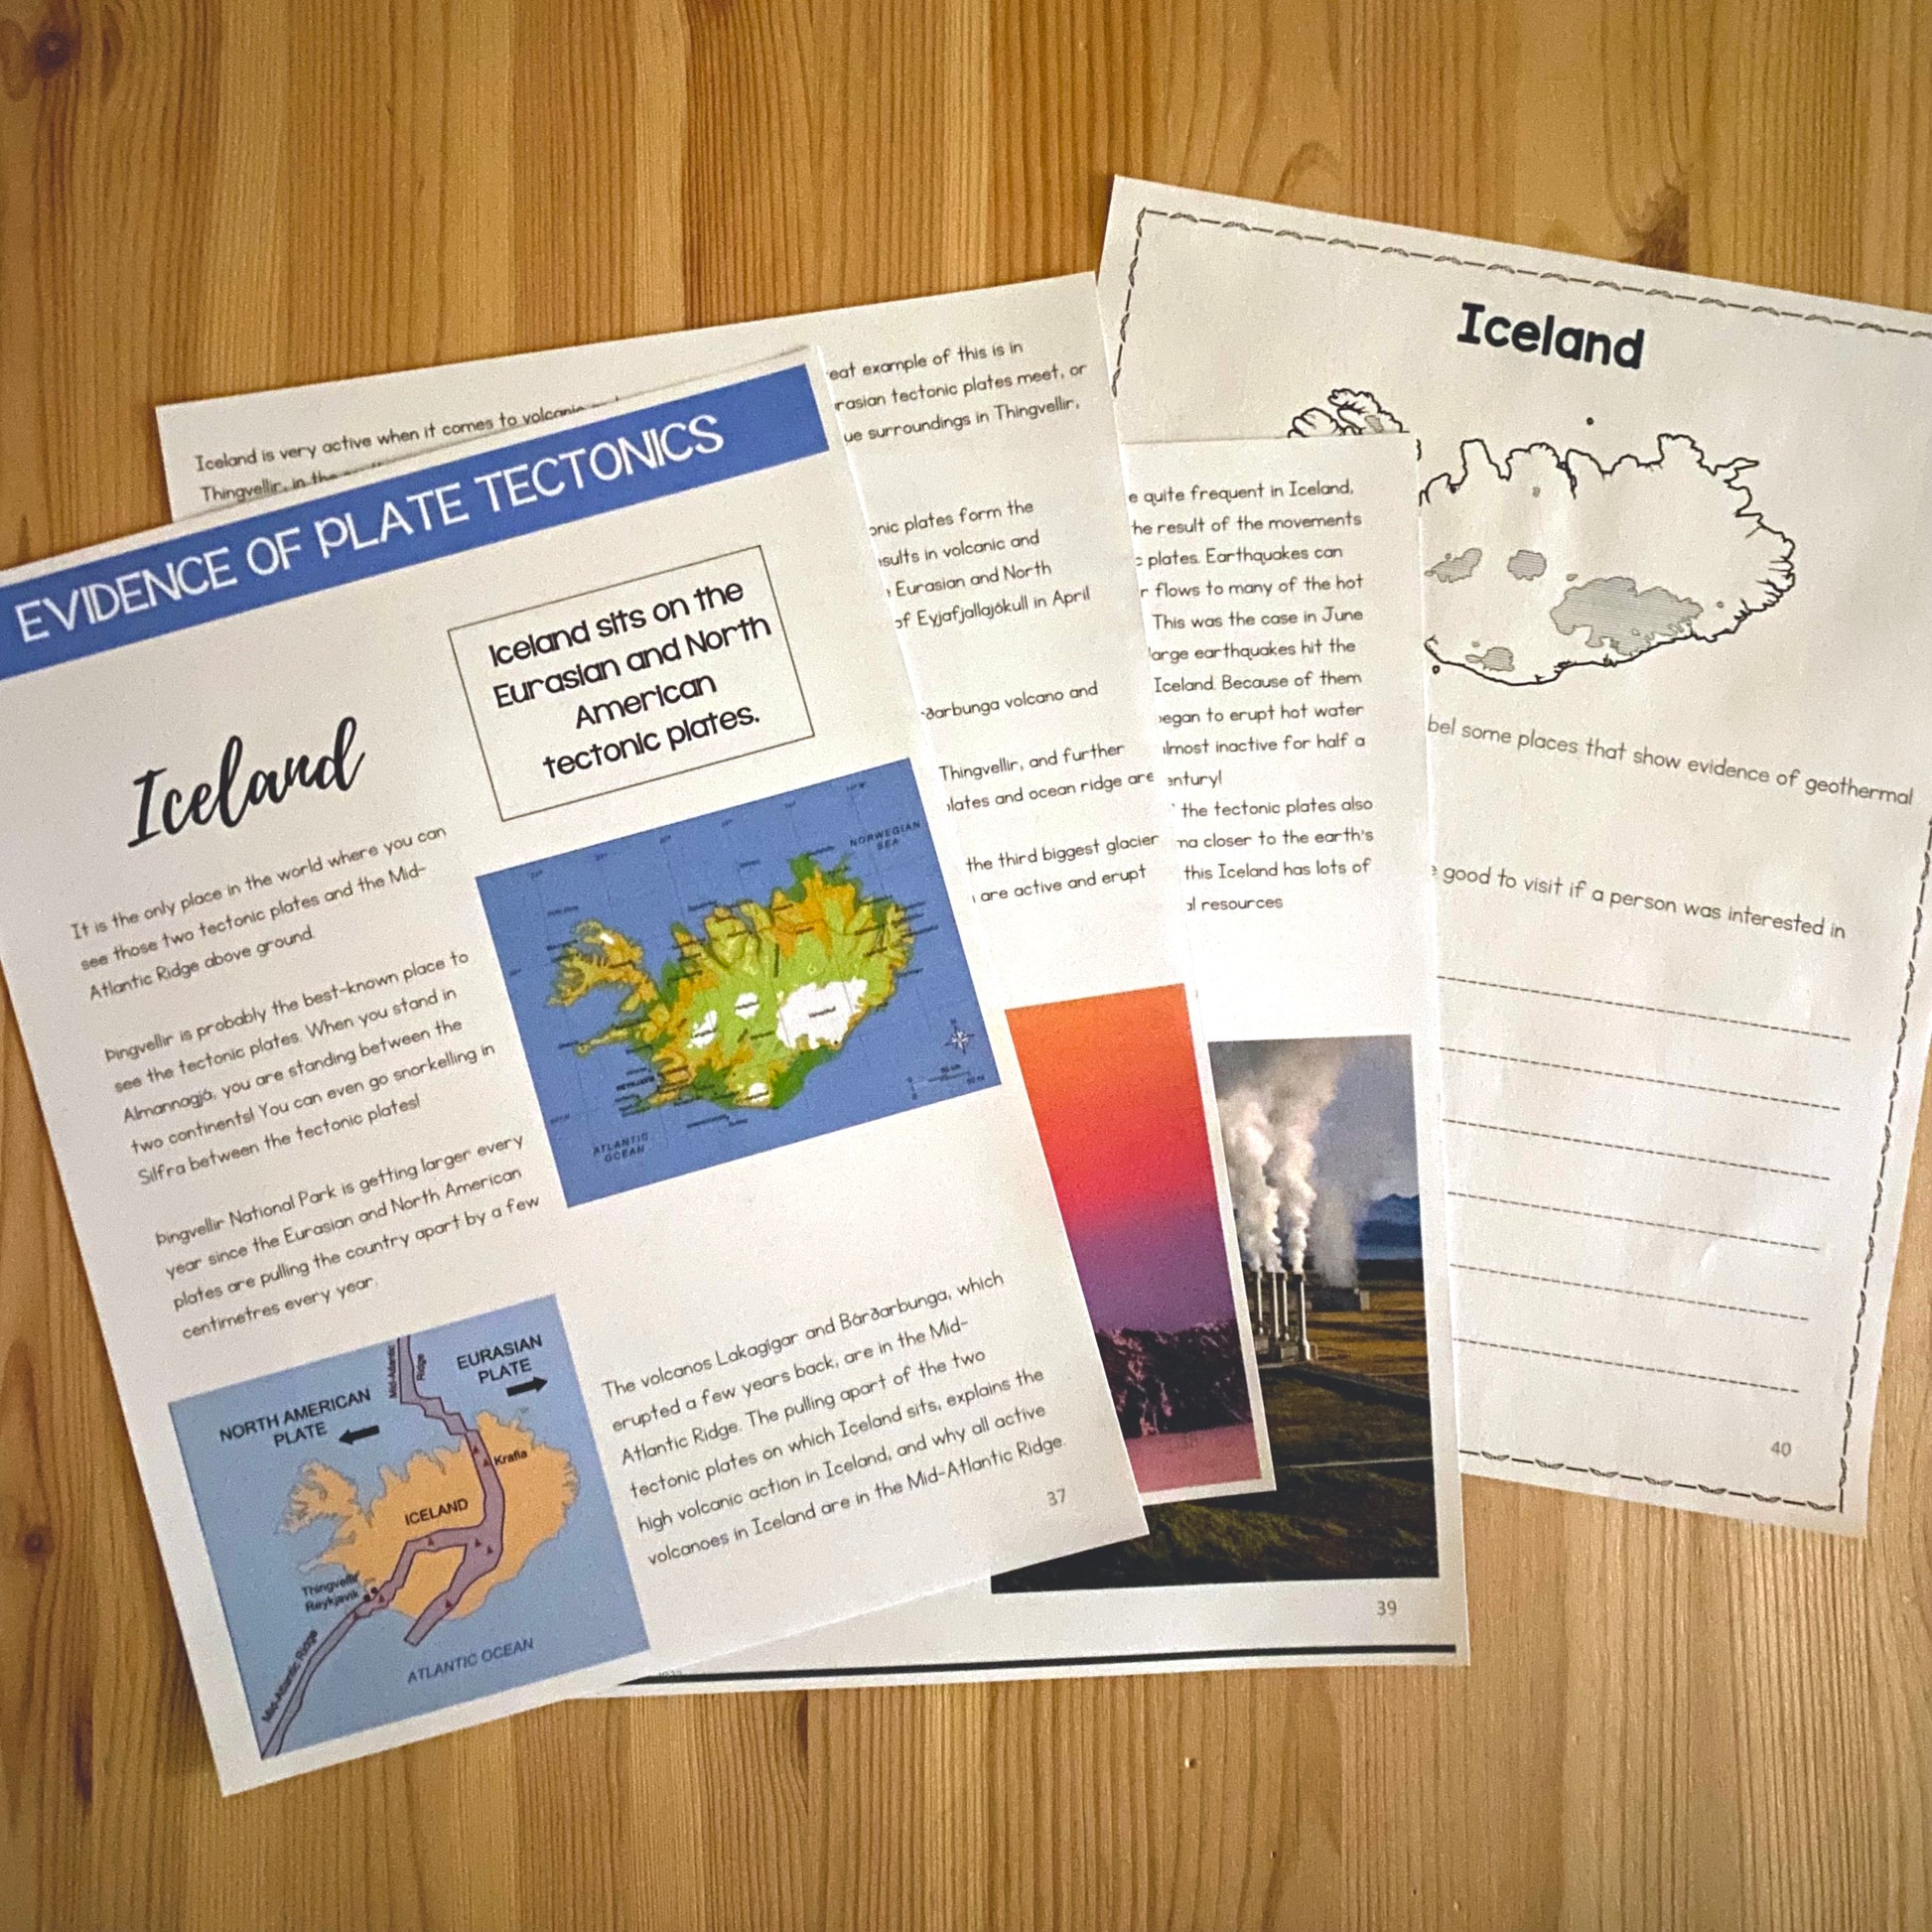 Plate tectonics vocabulary and lesson activities (geography) - montessorikiwi